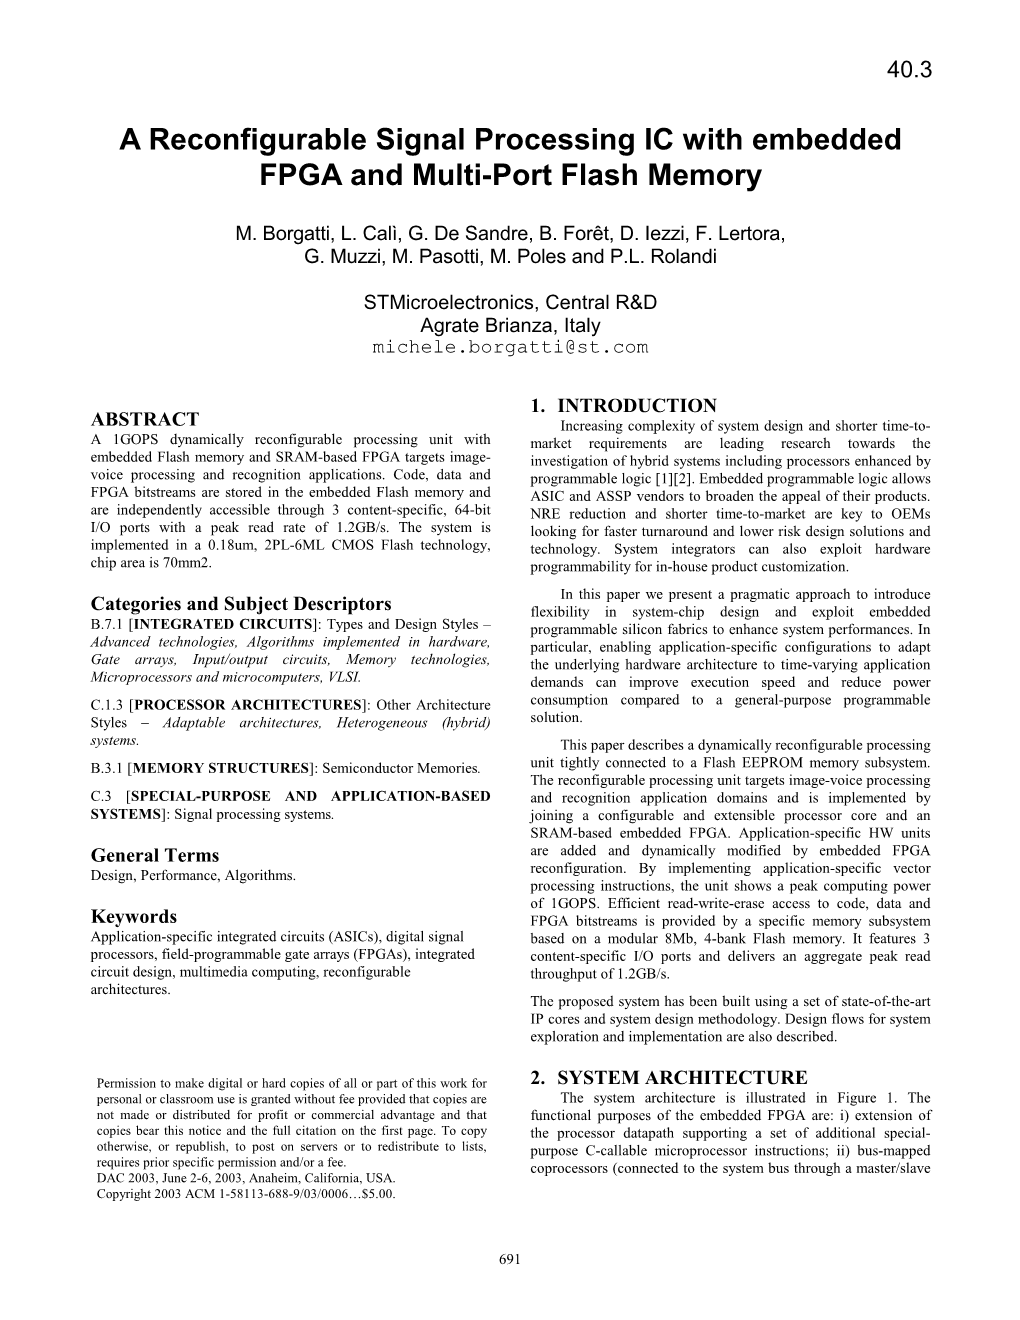 A Reconfigurable Signal Processing IC with Embedded FPGA and Multi-Port Flash Memory